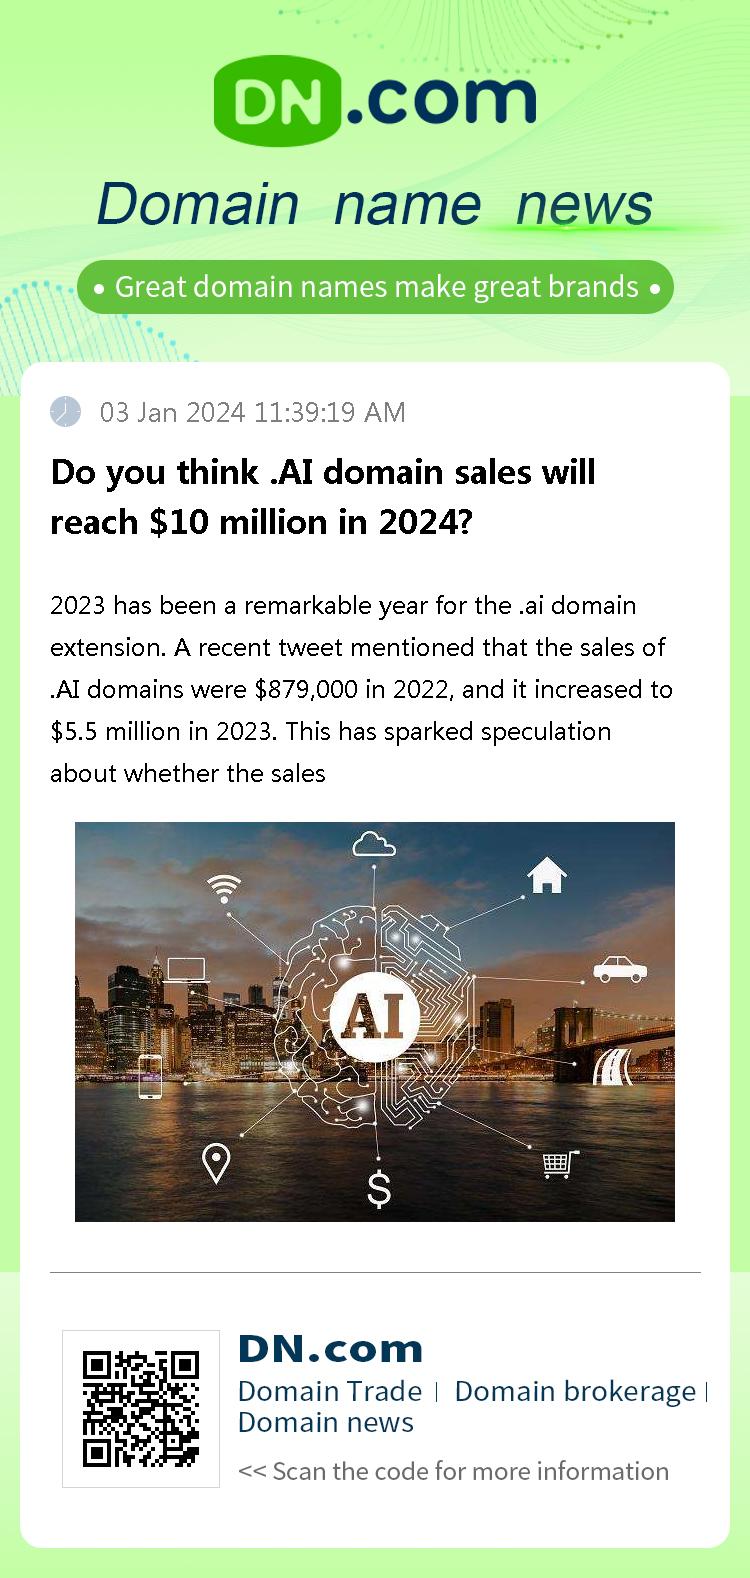 Do you think .AI domain sales will reach $10 million in 2024?